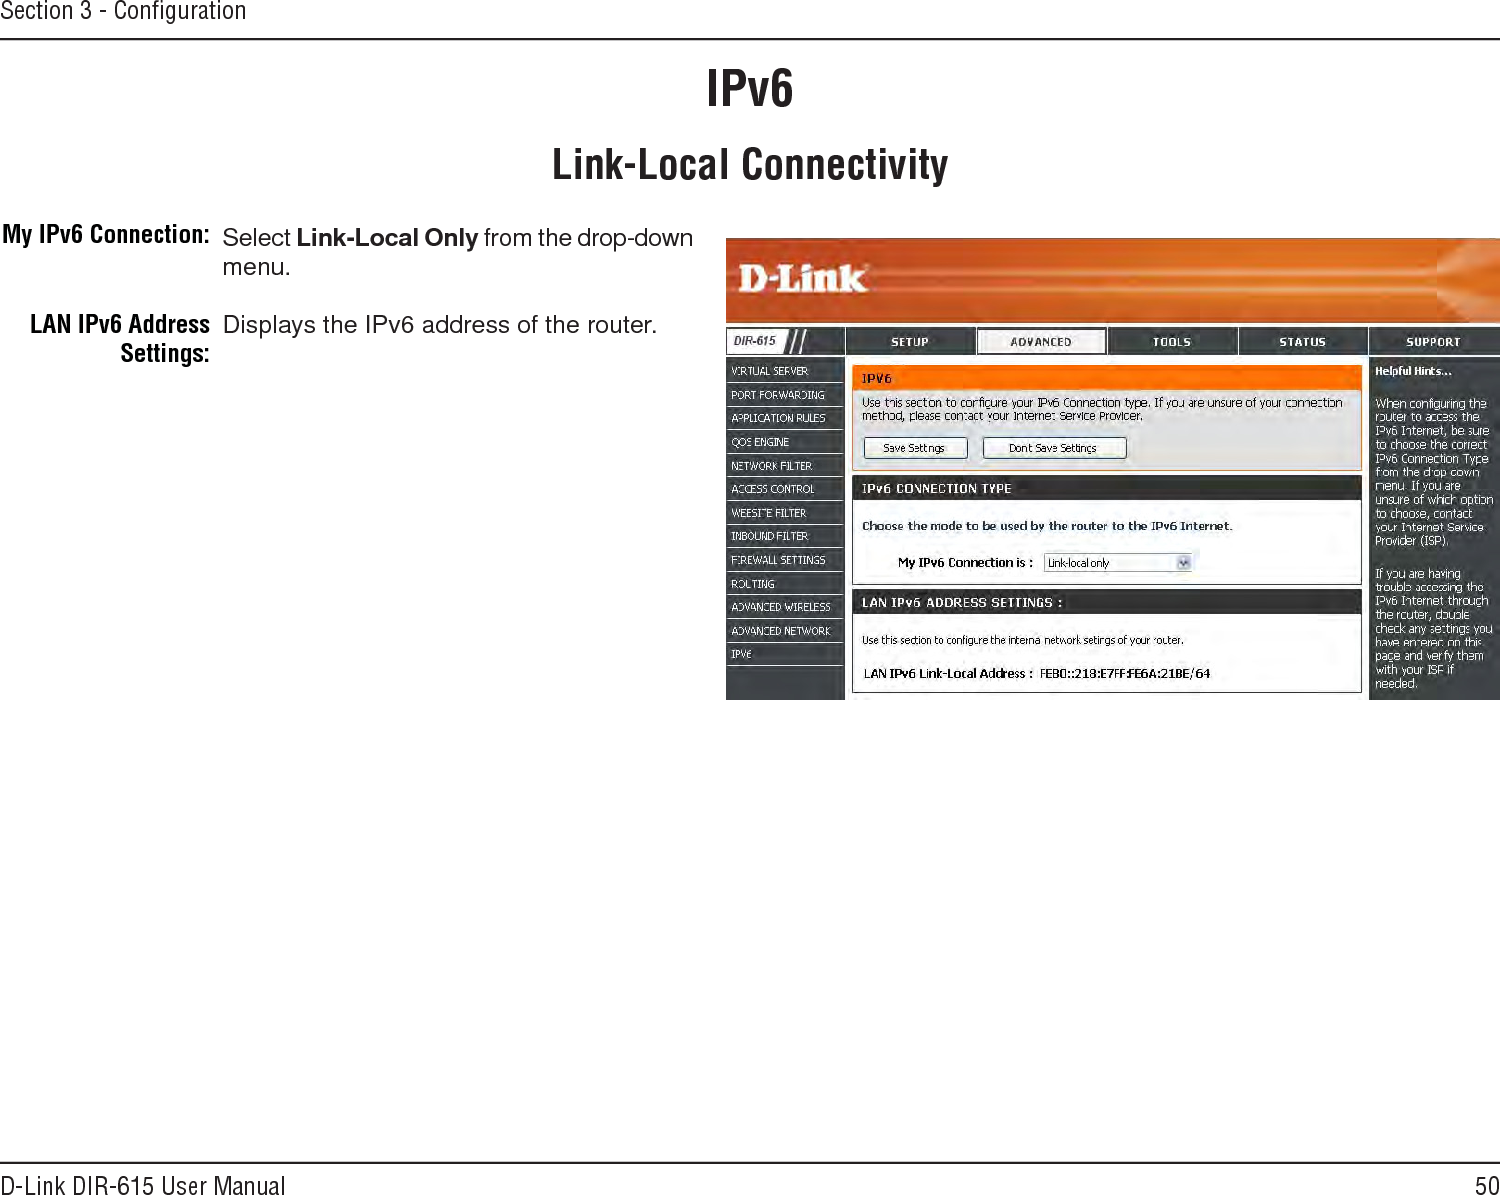 50D-Link DIR-615 User ManualSection 3 - ConﬁgurationIPv6Select Link-Local.Only from the drop-down menu.Displays the IPv6 address of the router.My IPv6 Connection:LAN IPv6 Address Settings:Link-Local Connectivity